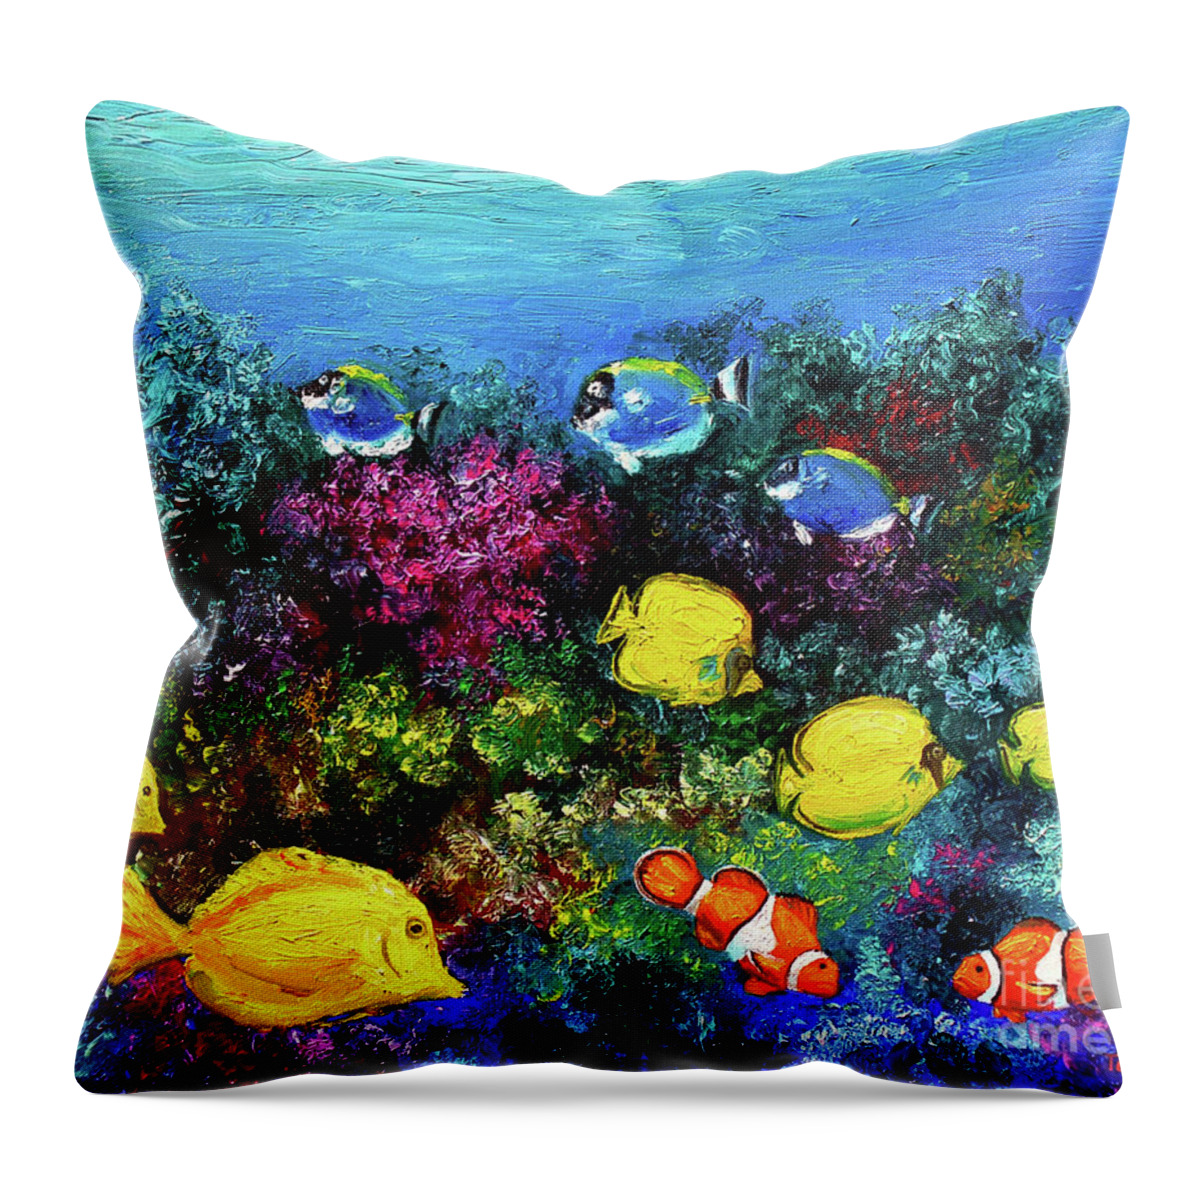 Sea Anemone Throw Pillow featuring the painting Tropical Salad by Tom Chapman